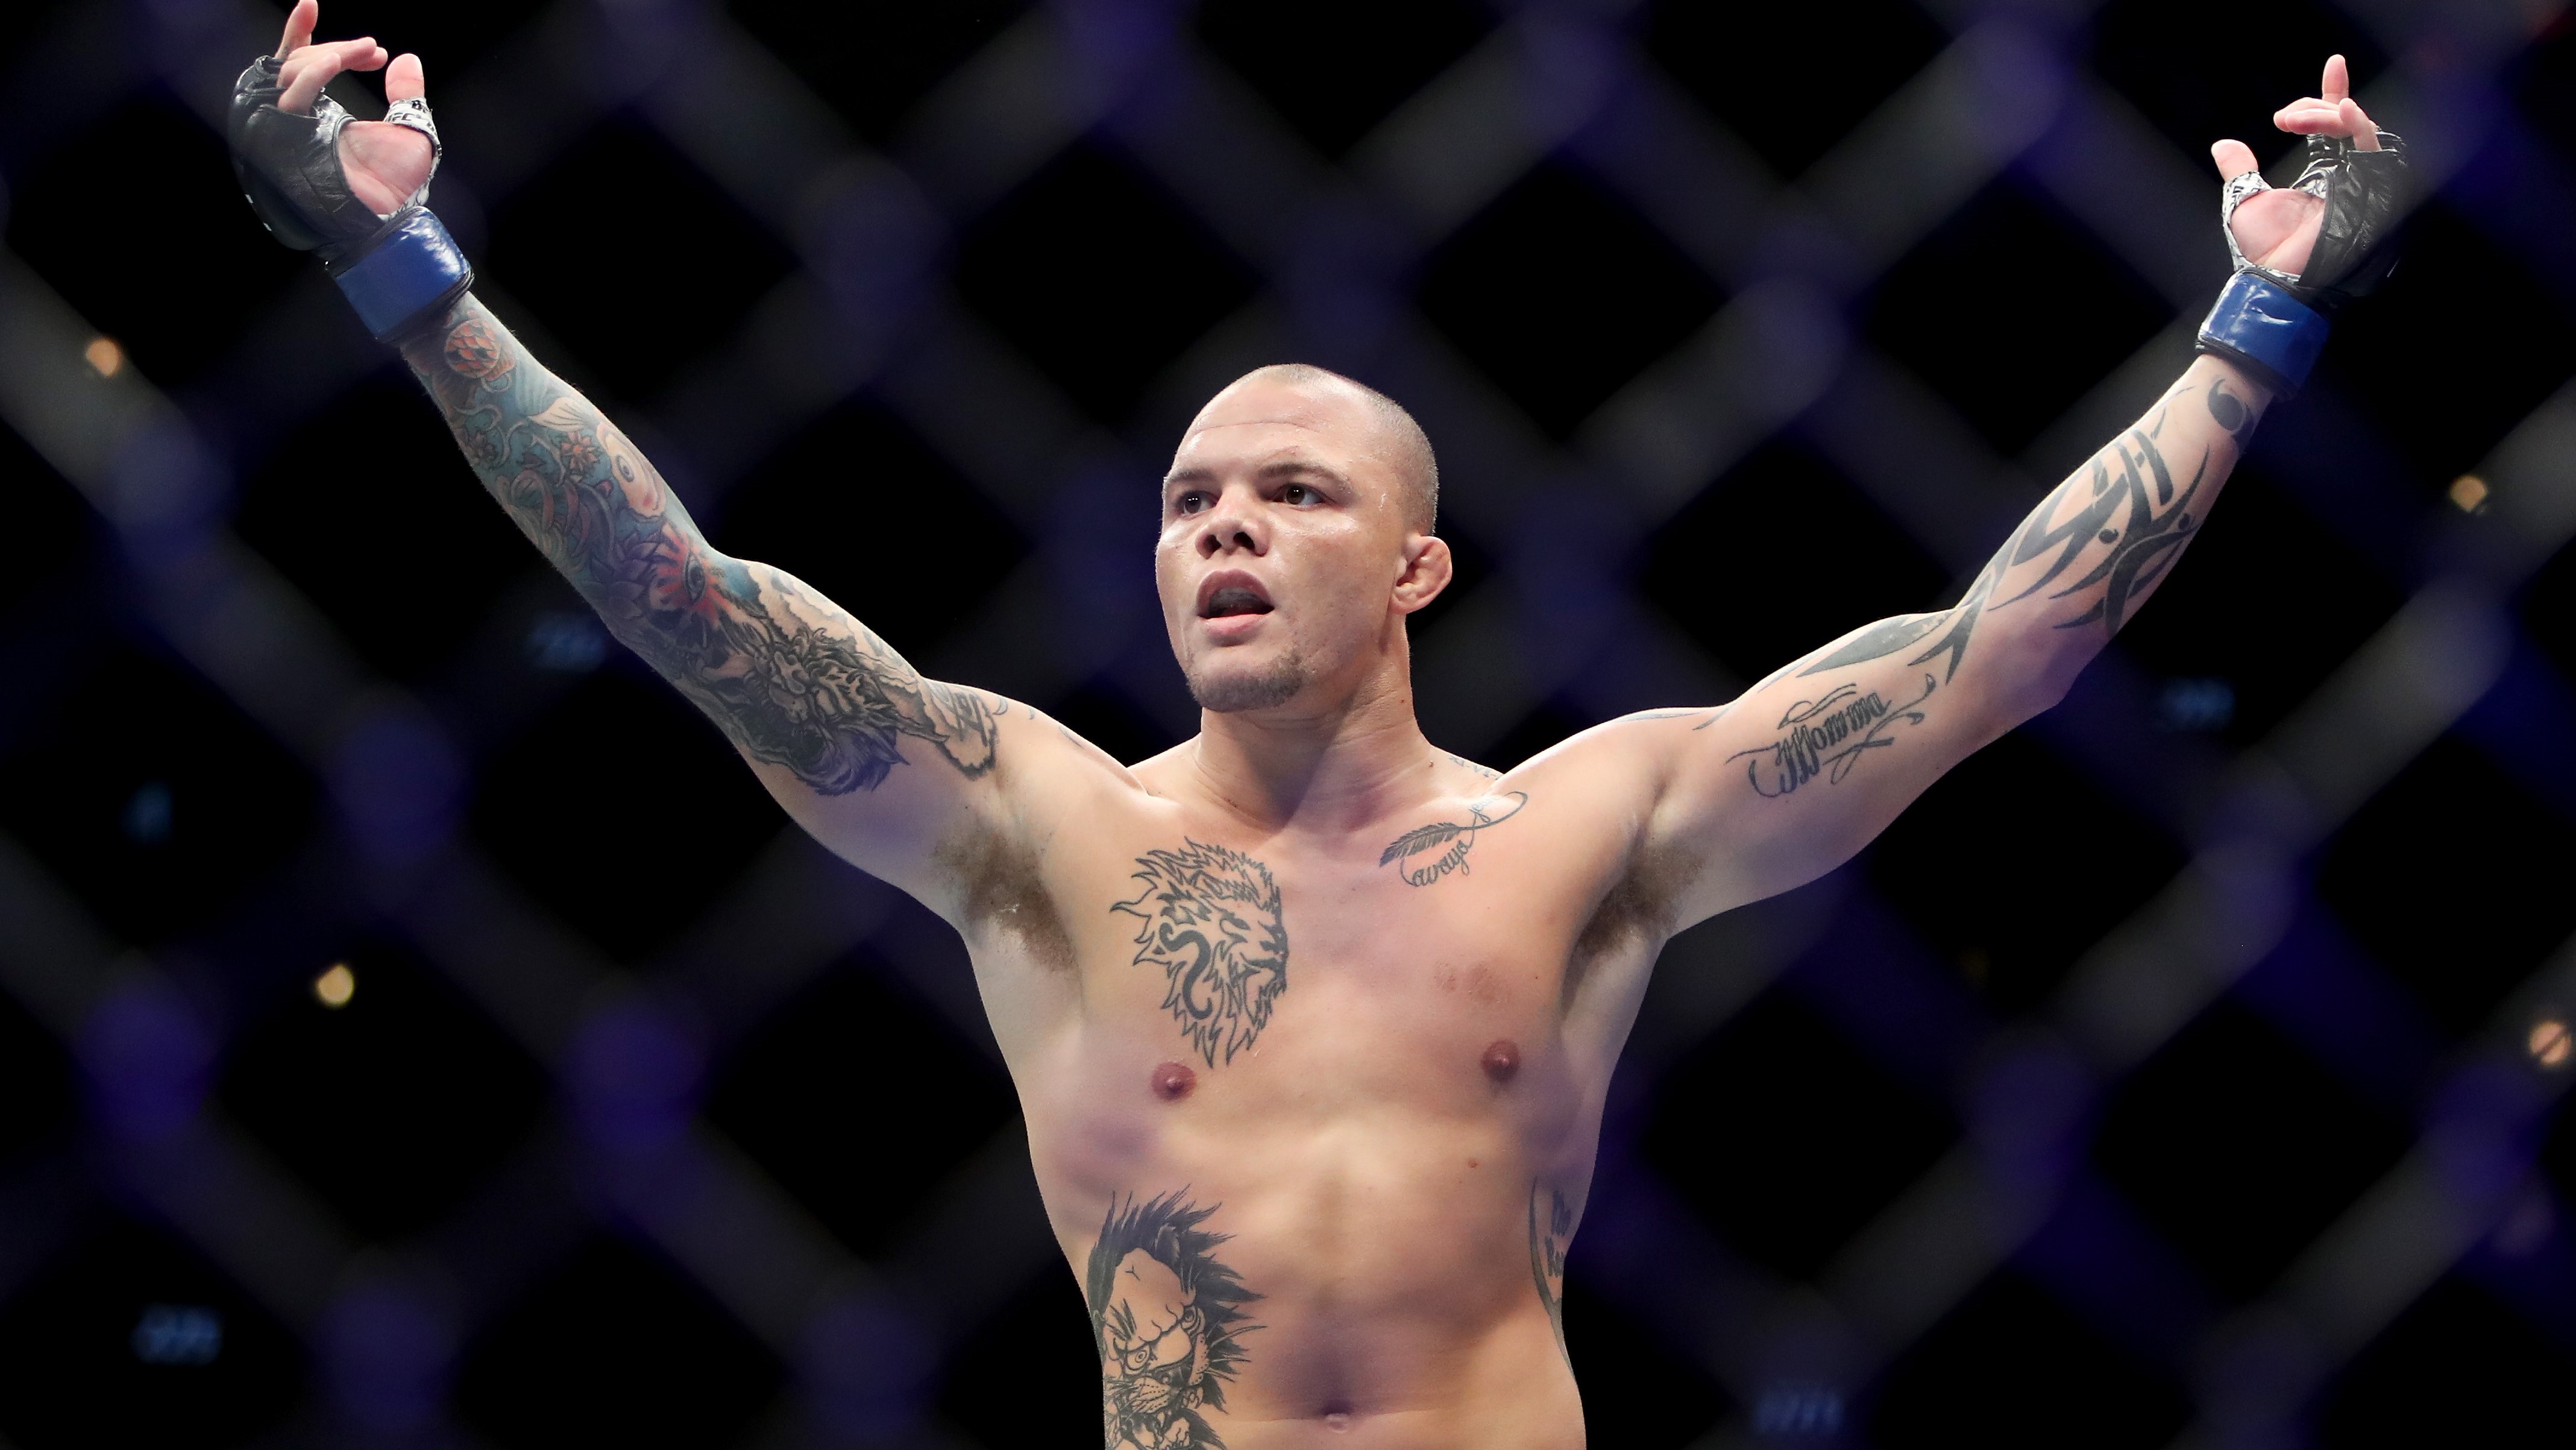 UFC Fight Night: Smith vs Teixeira live stream - how to watch online from anywhere